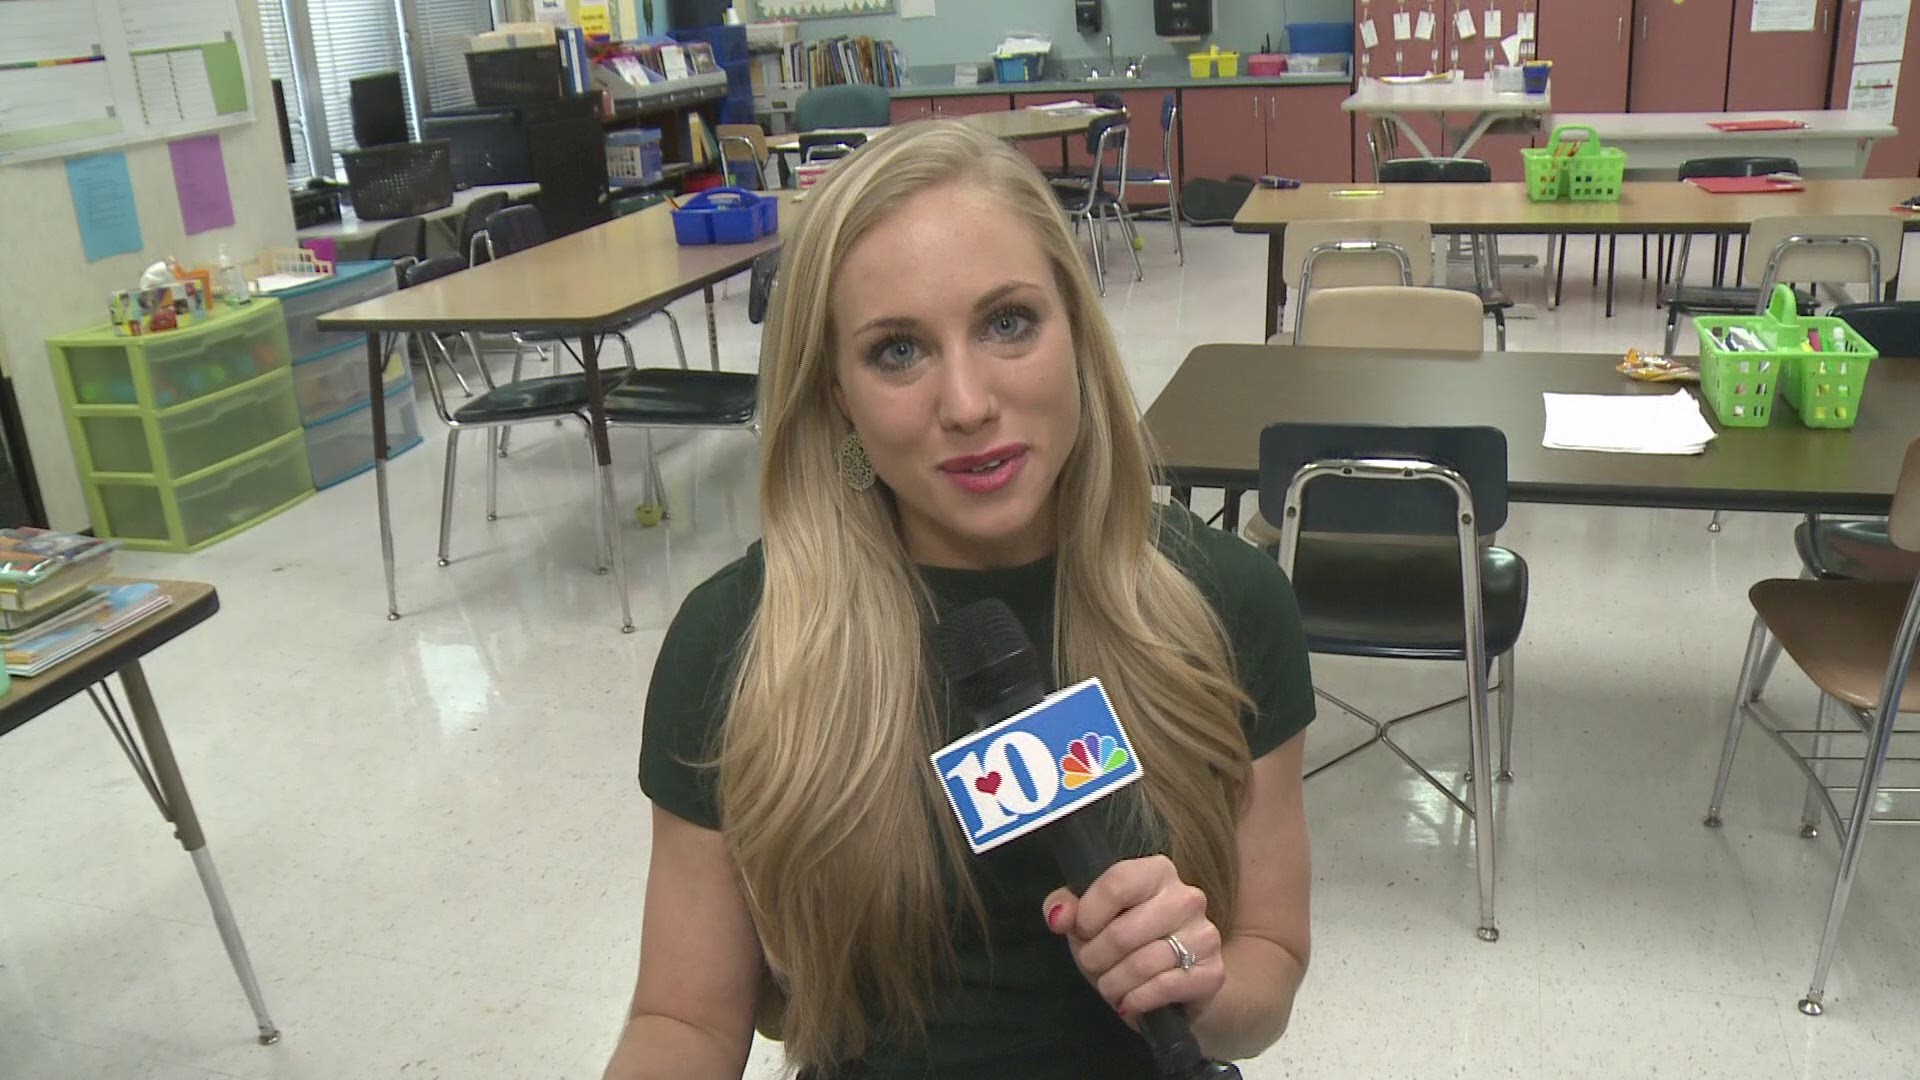 10News reporter Leslie Ackerson visited Willow Brook Elementary to find out why it's so cool.